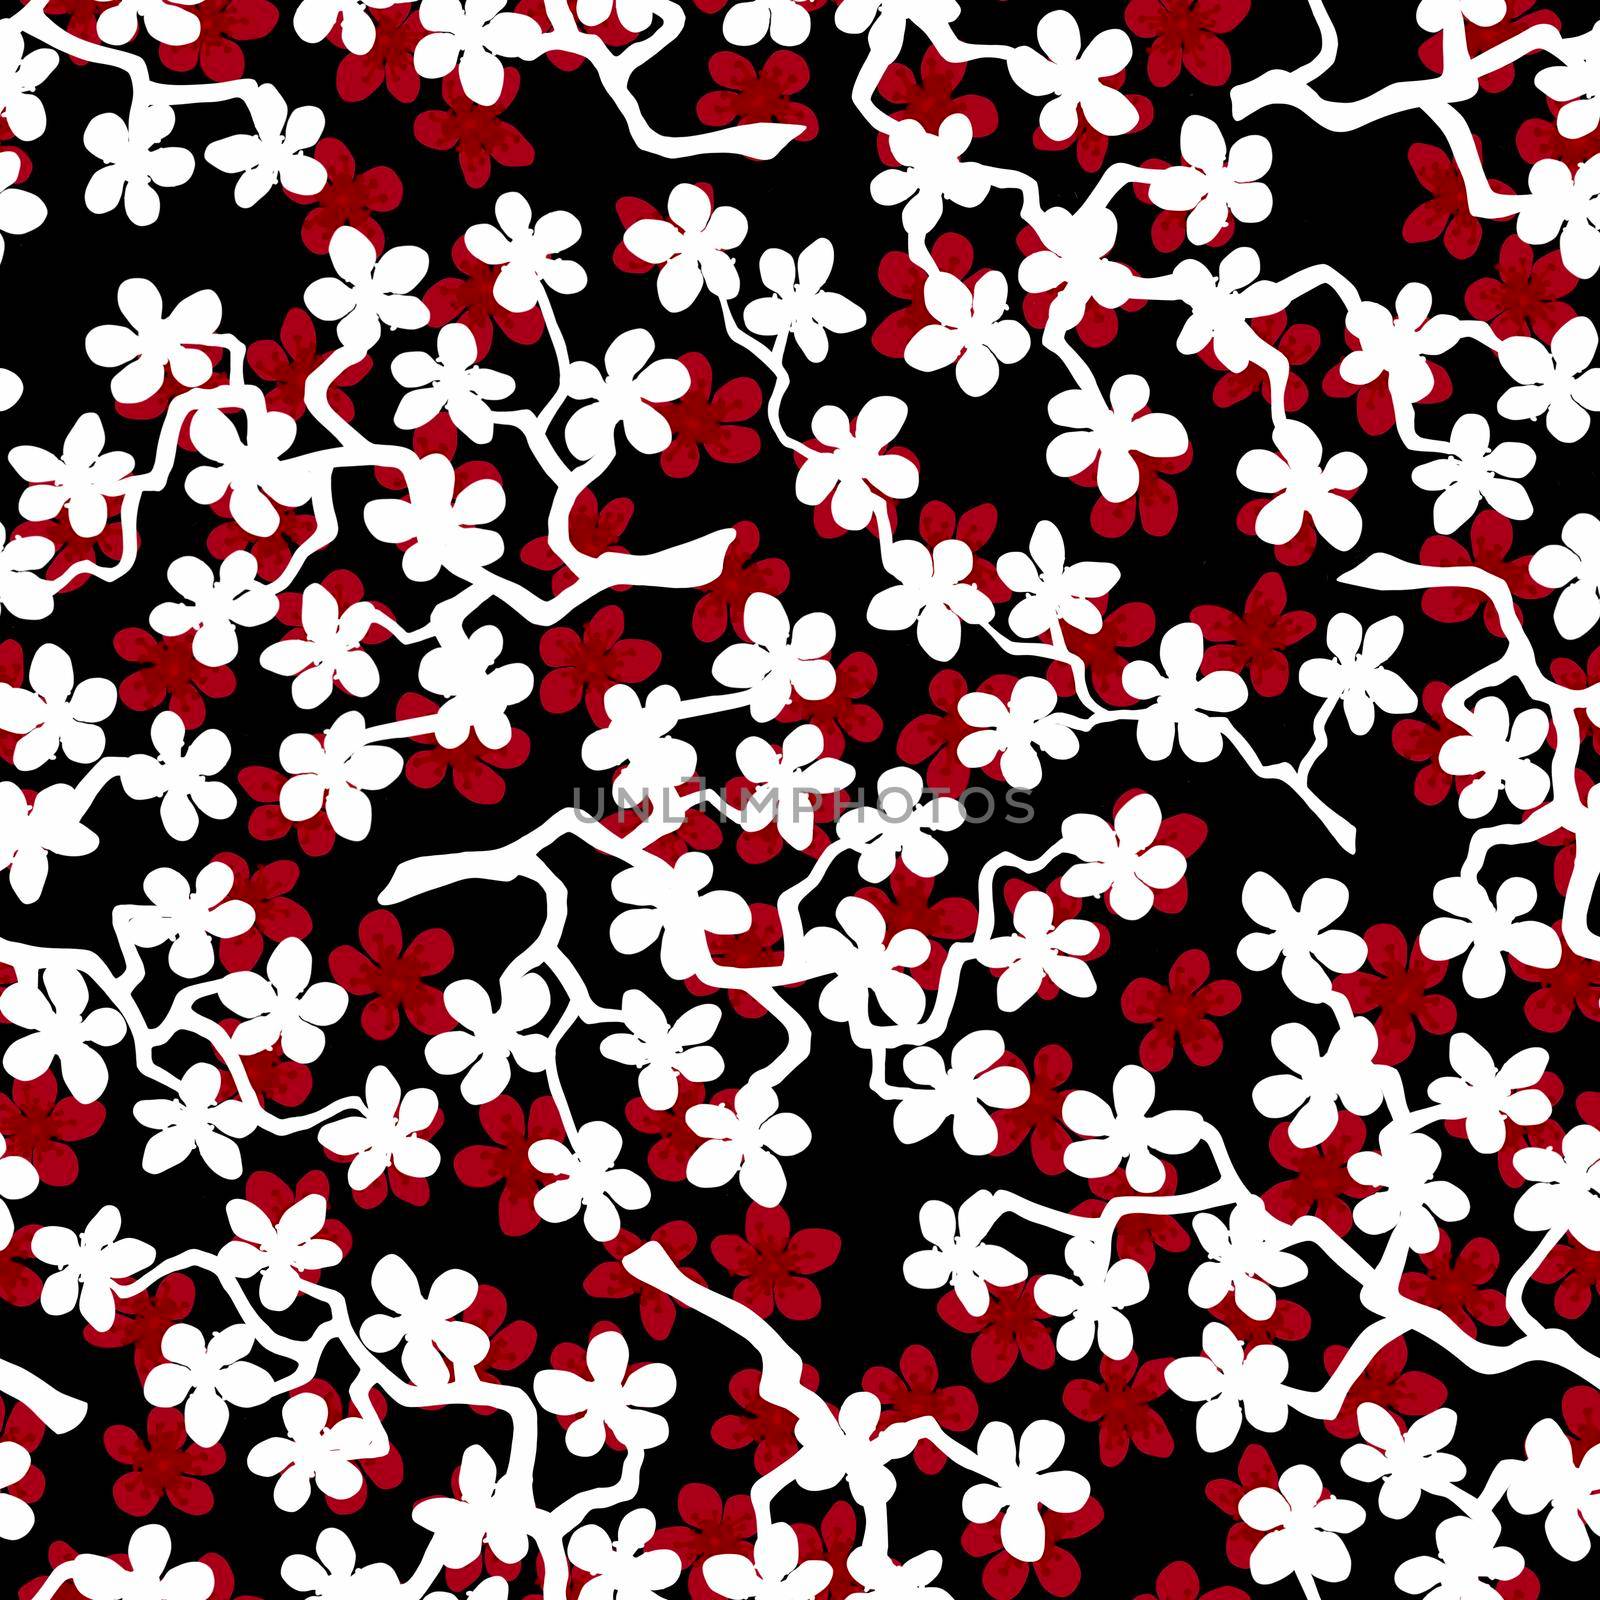 Seamless pattern with blossoming Japanese cherry sakura branches for fabric,packaging,wallpaper,textile decor,design, invitations,gift wrap,manufacturing.Red and white flowers on black background